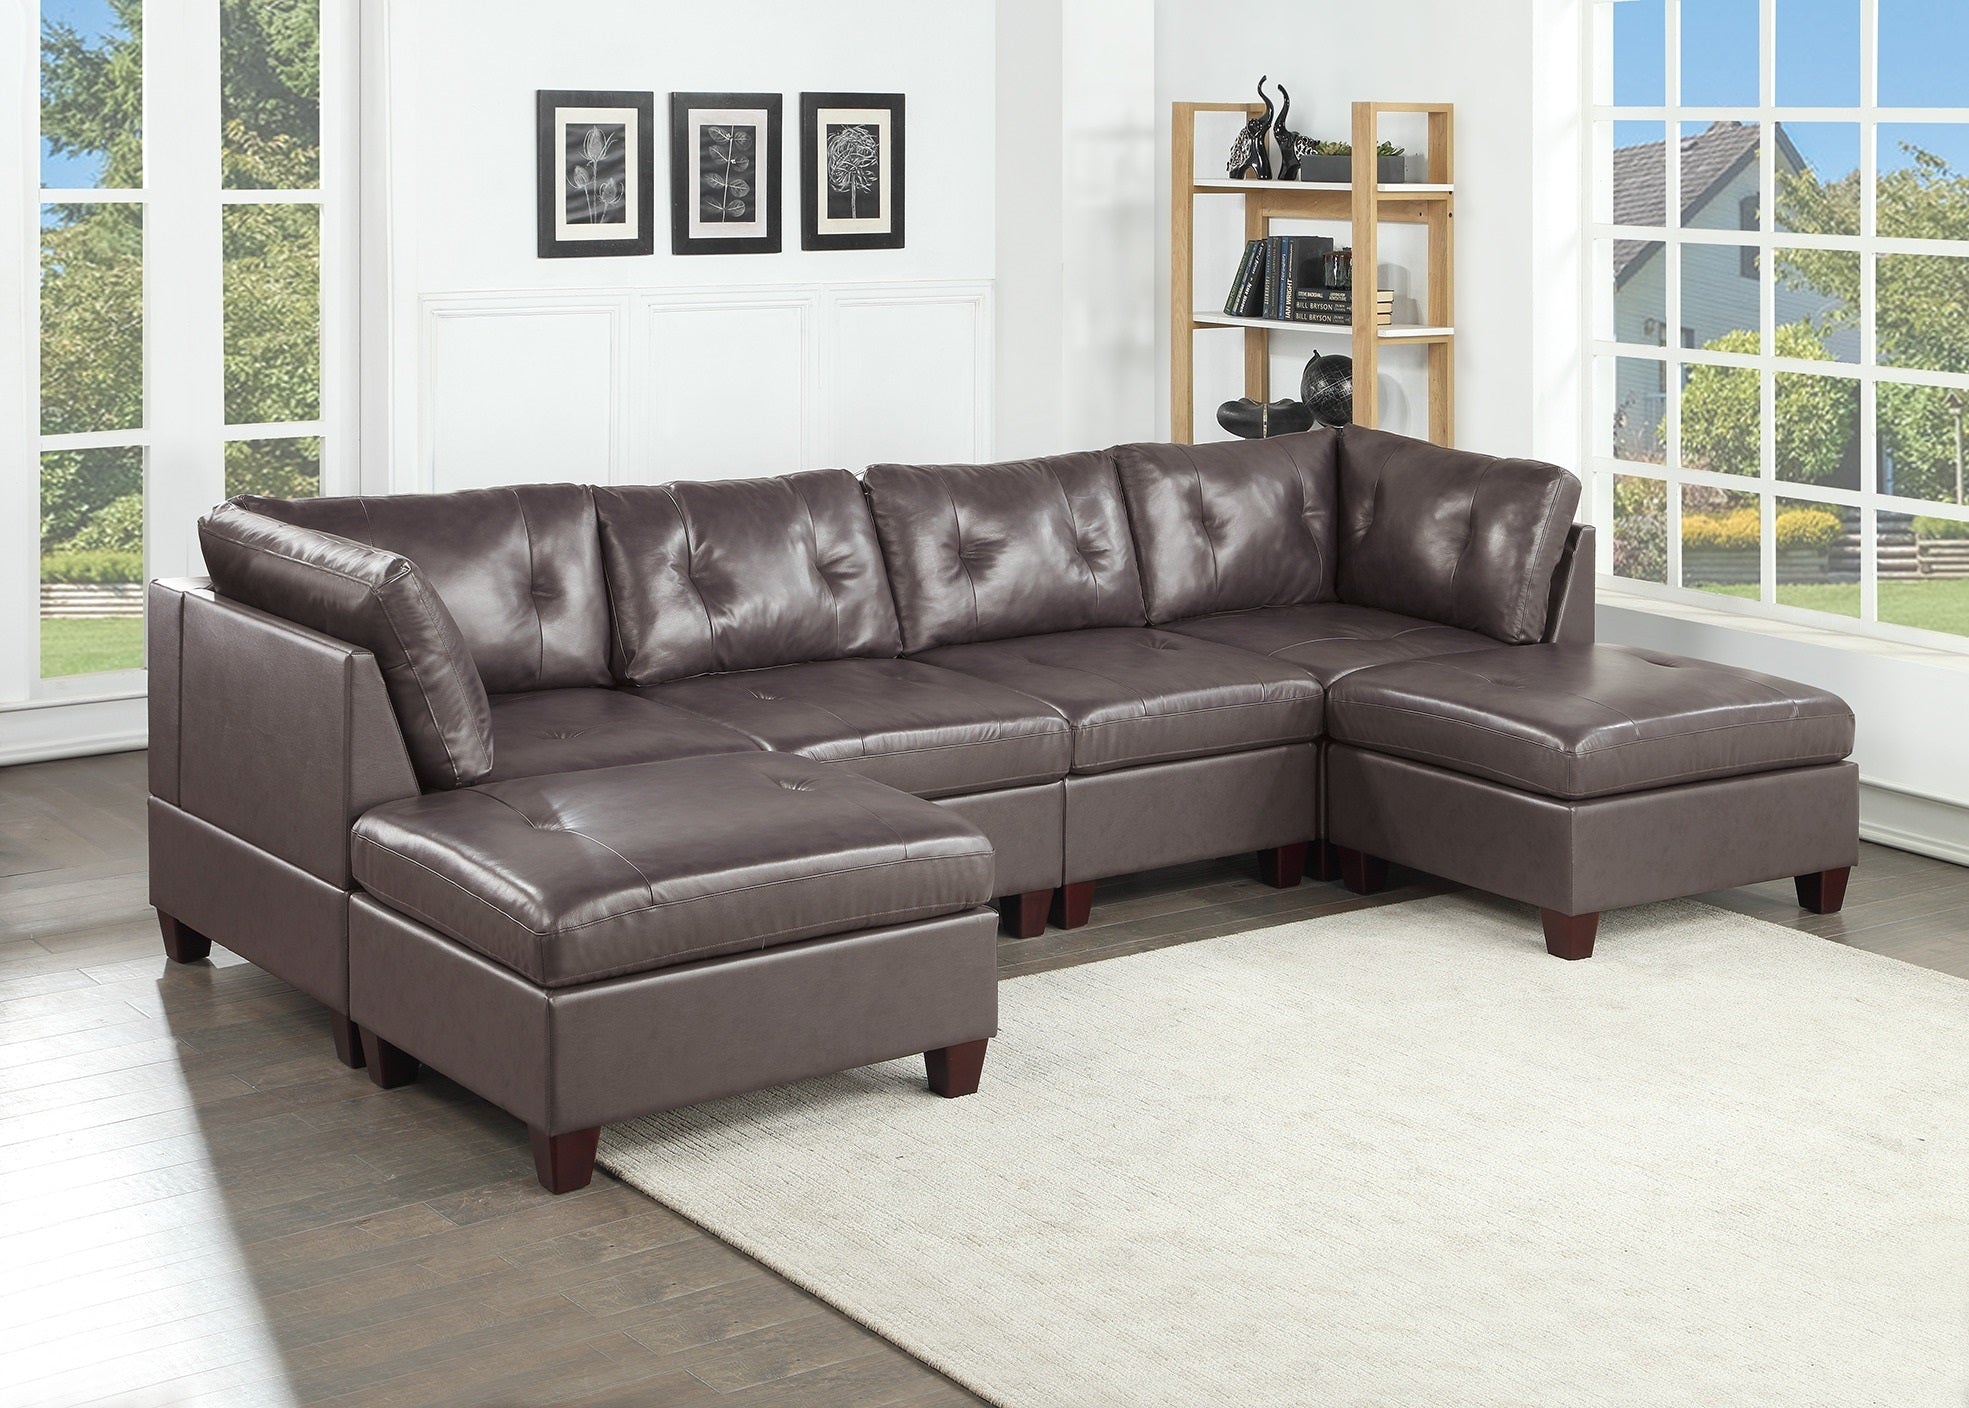 Leather Tufted 6 Piece Set 2x Wedge 2x Armless Chair 2x Ottomans Sofa (Brown)